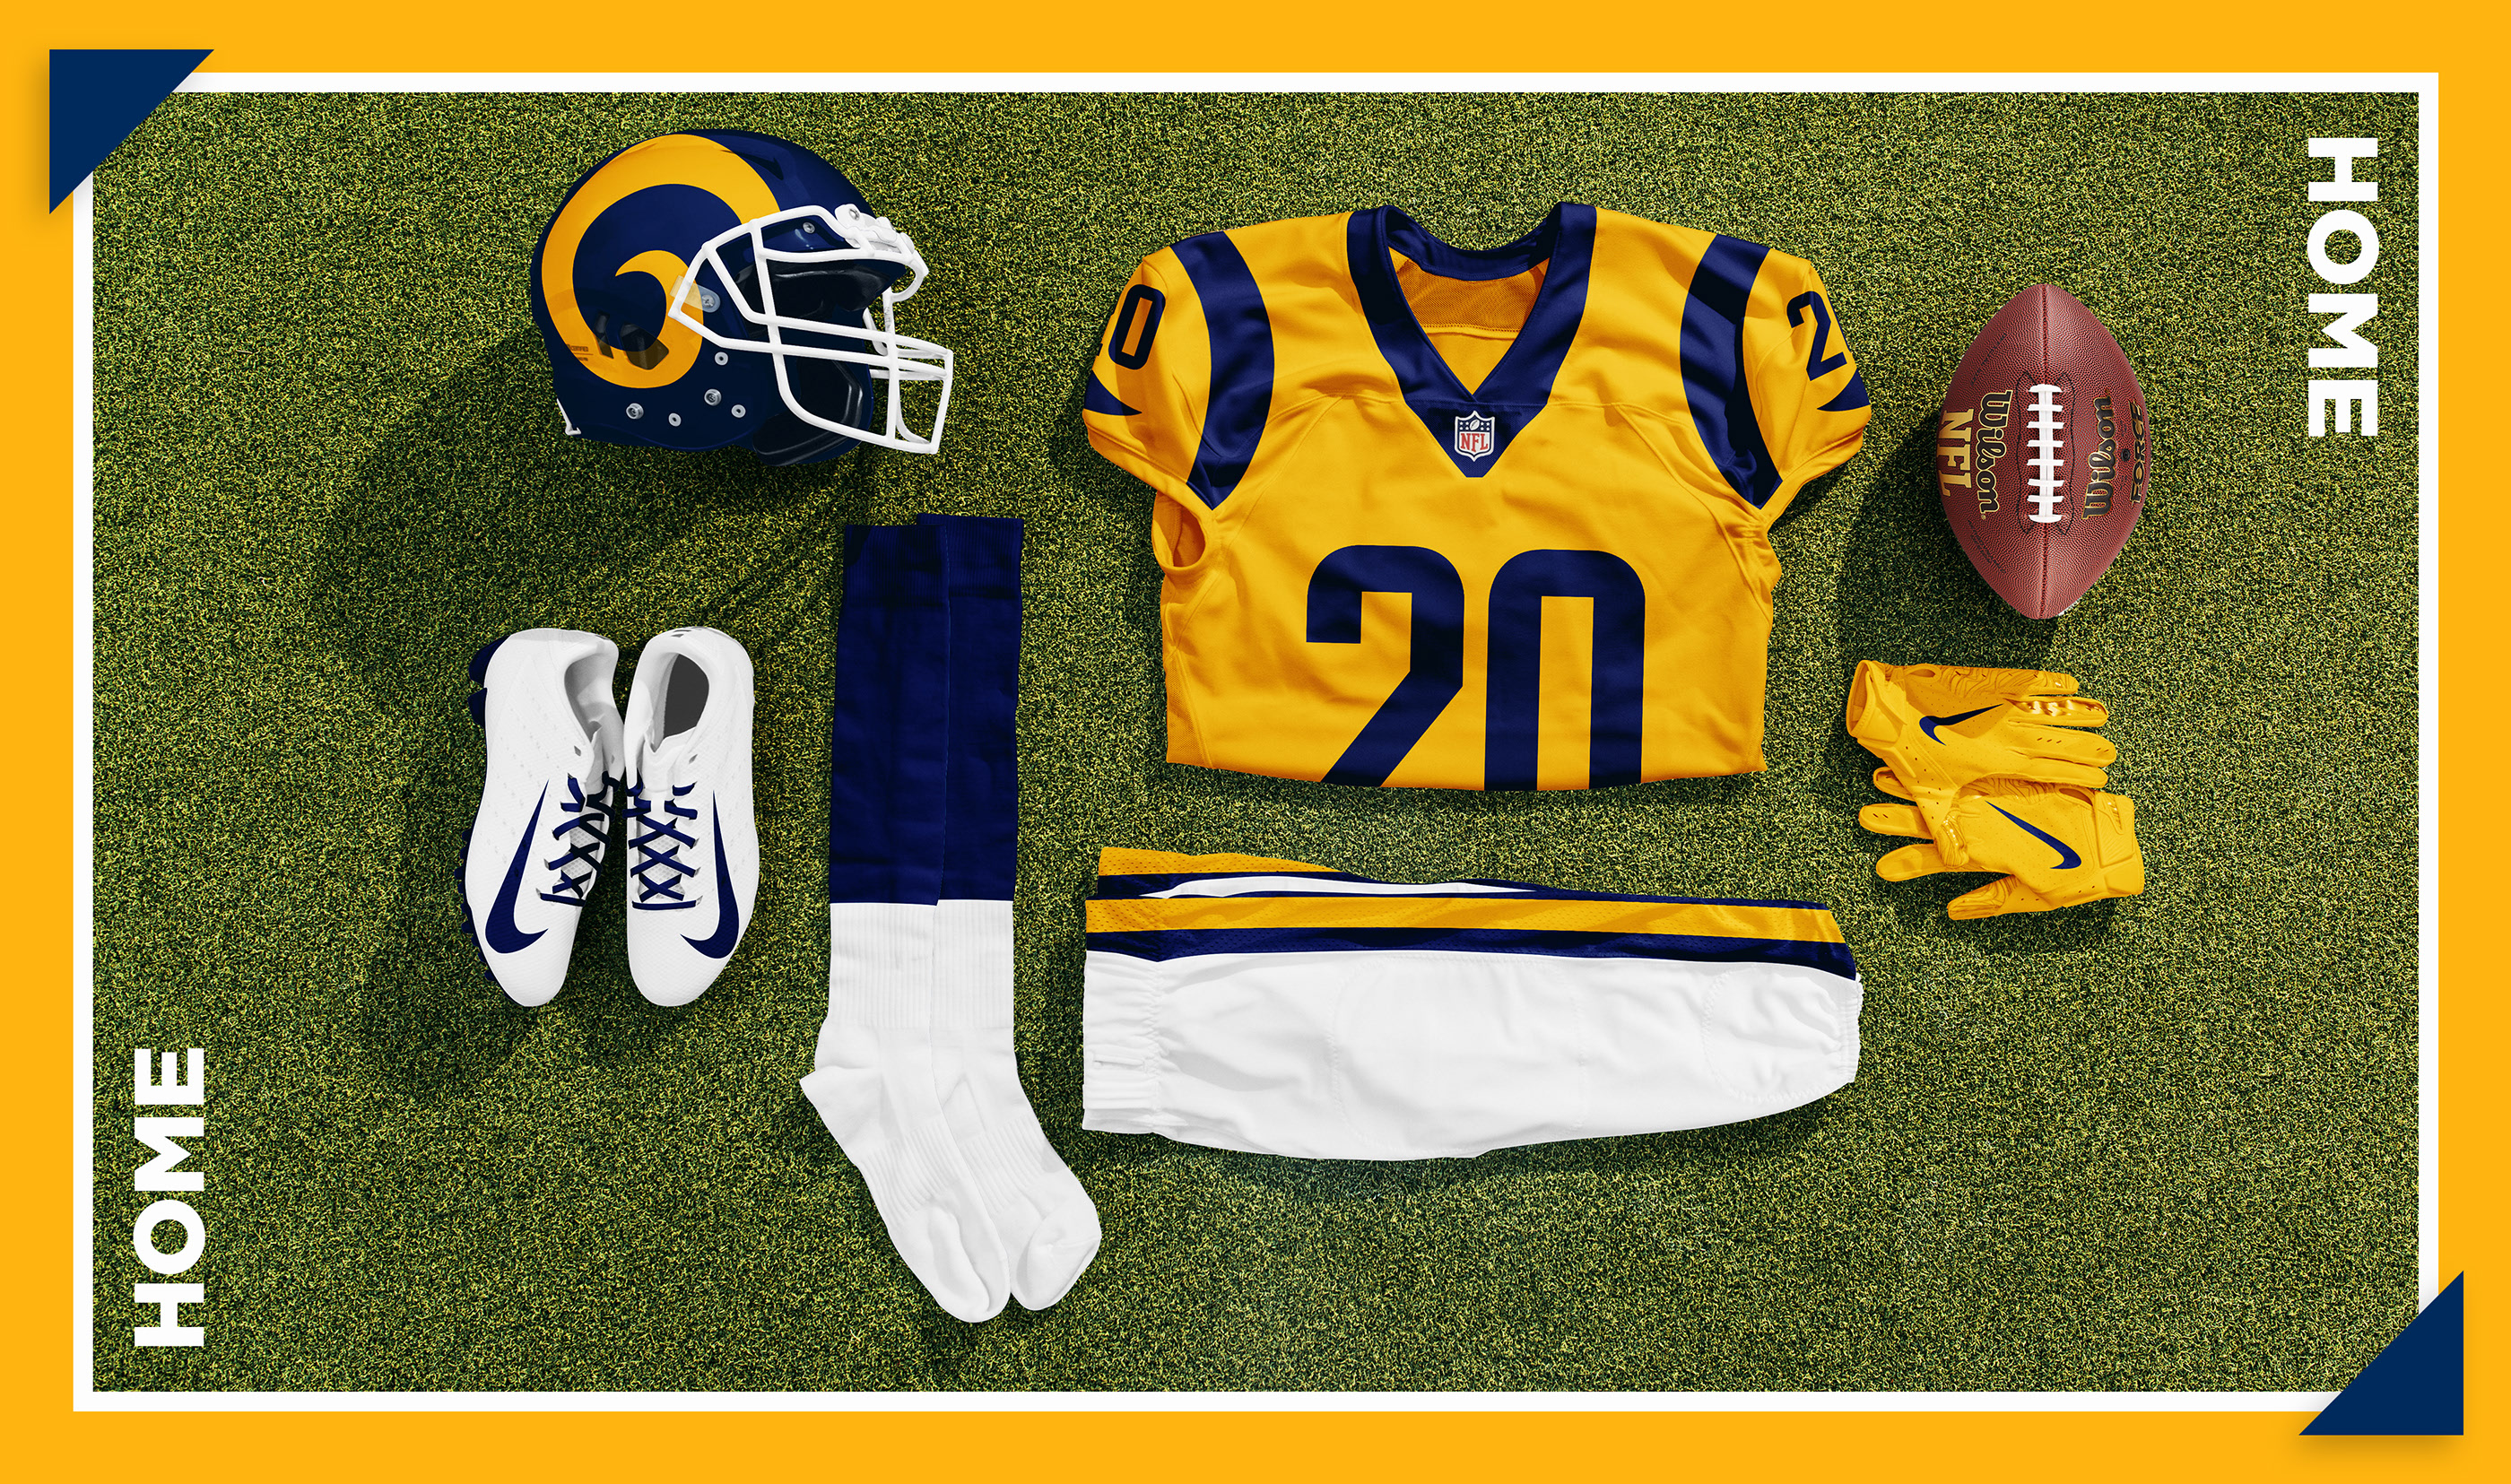 Rams have unusual plan for annual new uniform designs